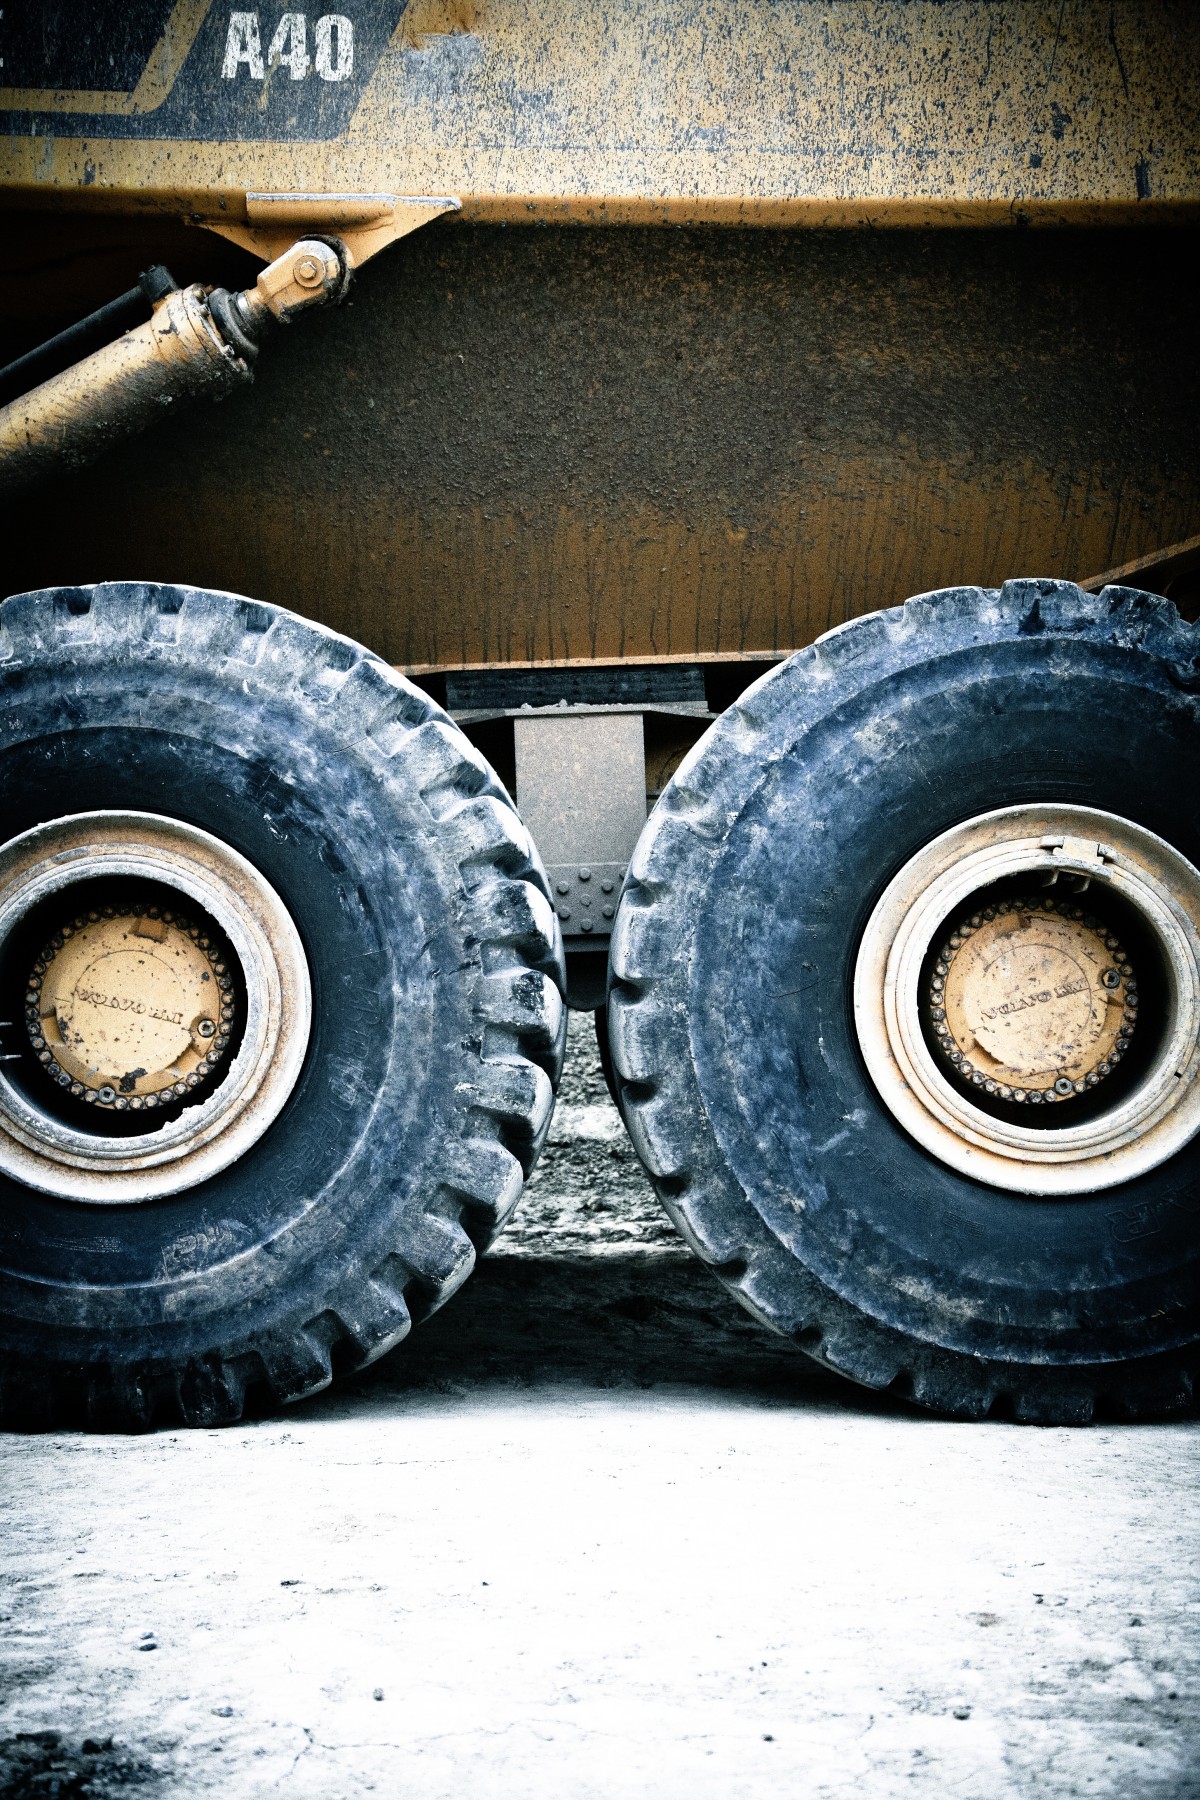 How to Keep Your Wheels Spinning: A Guide to Truck Tyre Sale and Repair